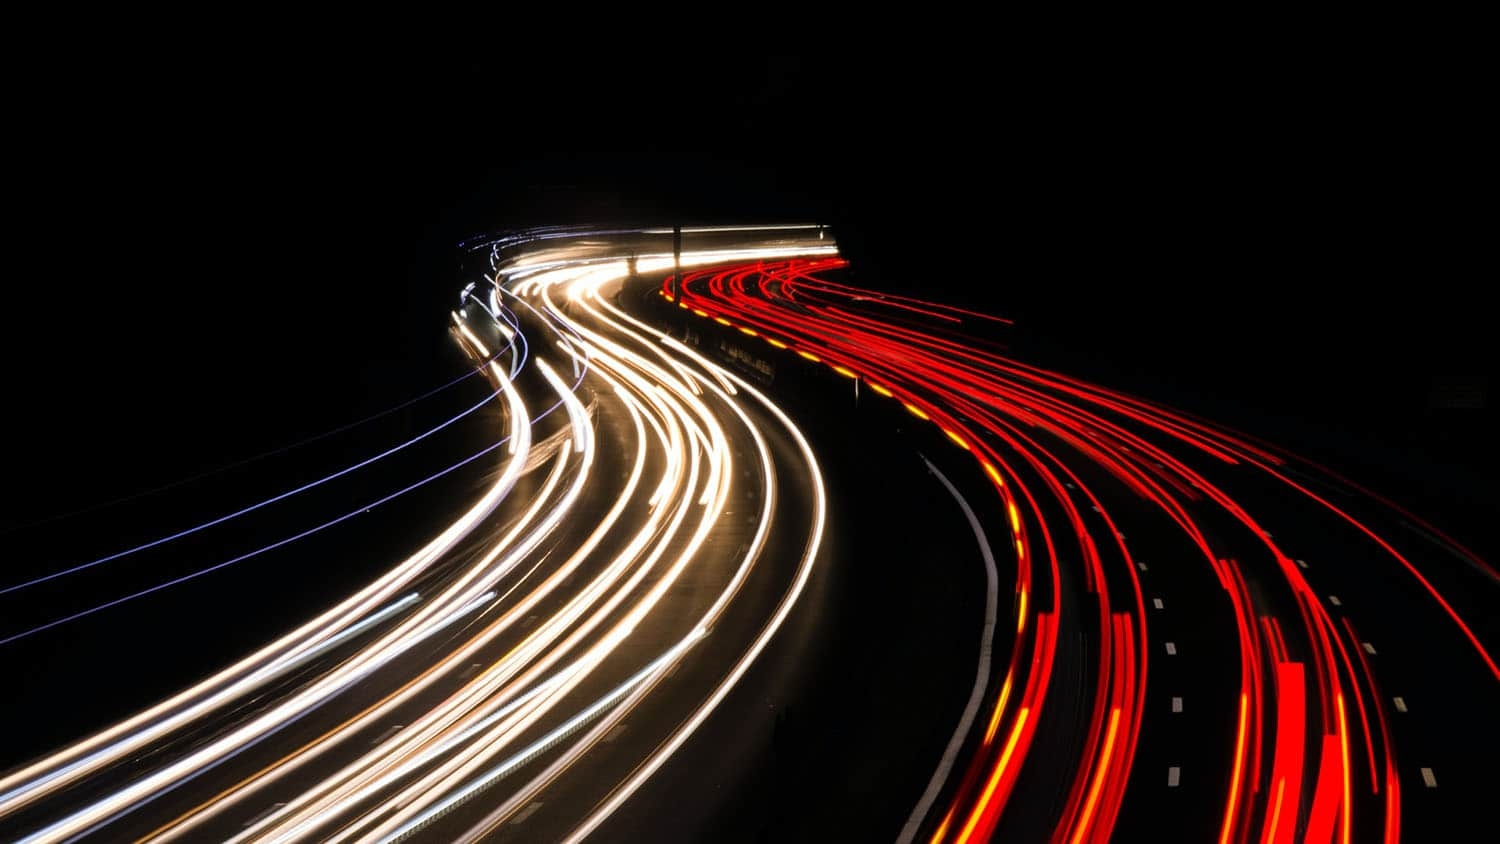 night-time photo shows two lines of traffic, one moving toward the camera, and one moving away from the camera